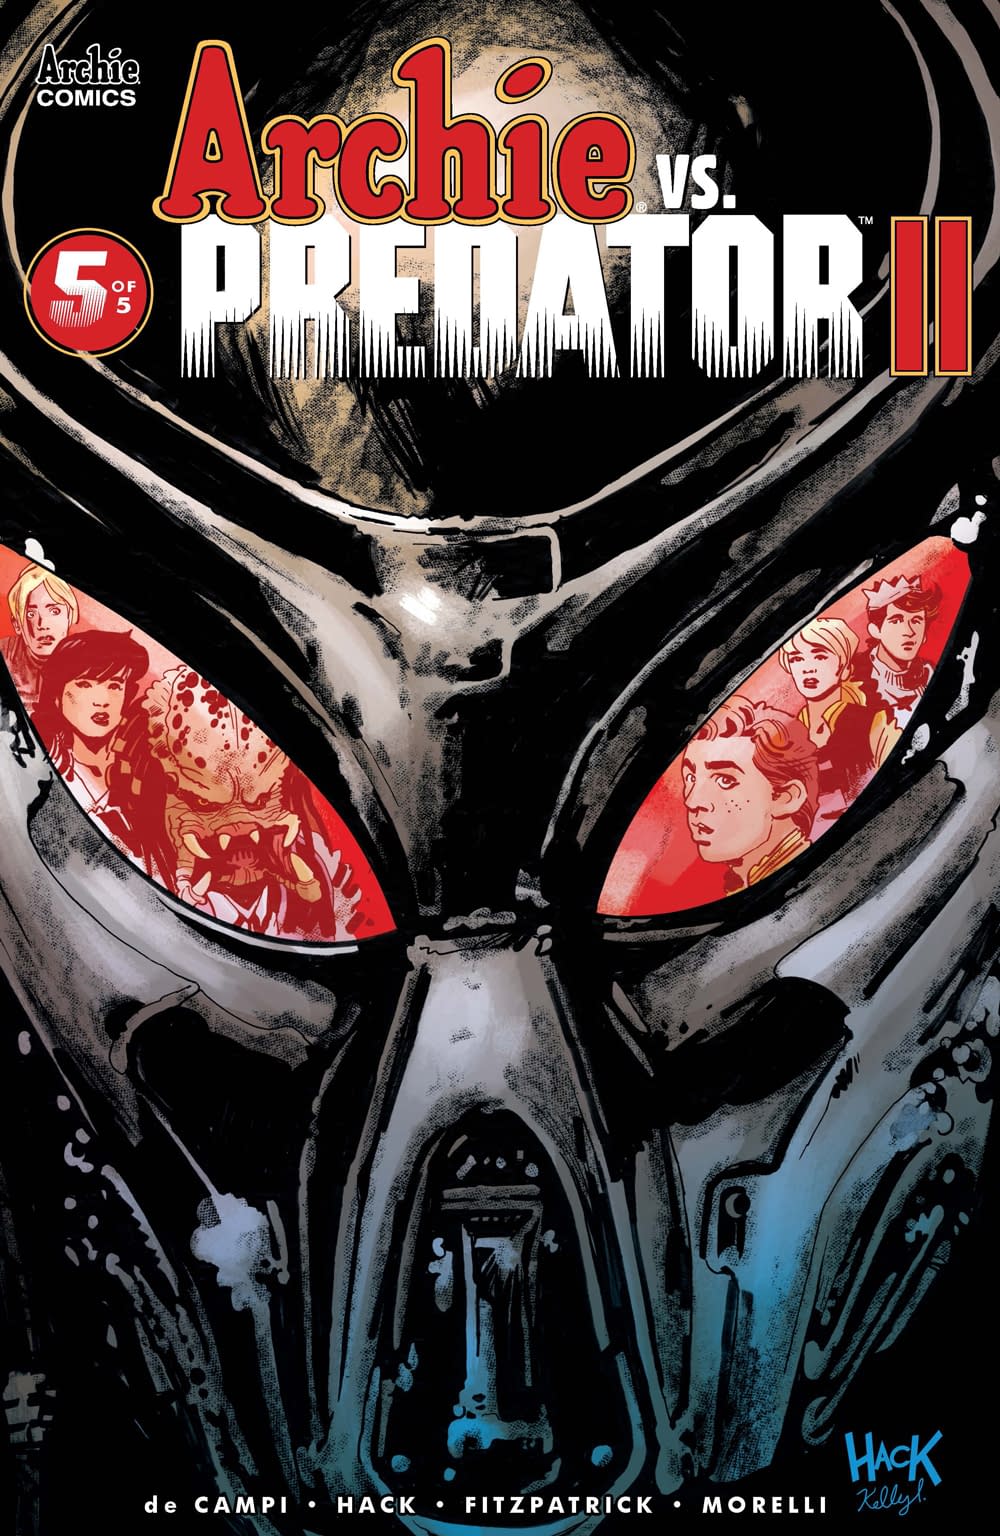 First Look at January's Archie vs. Predator 2 #5